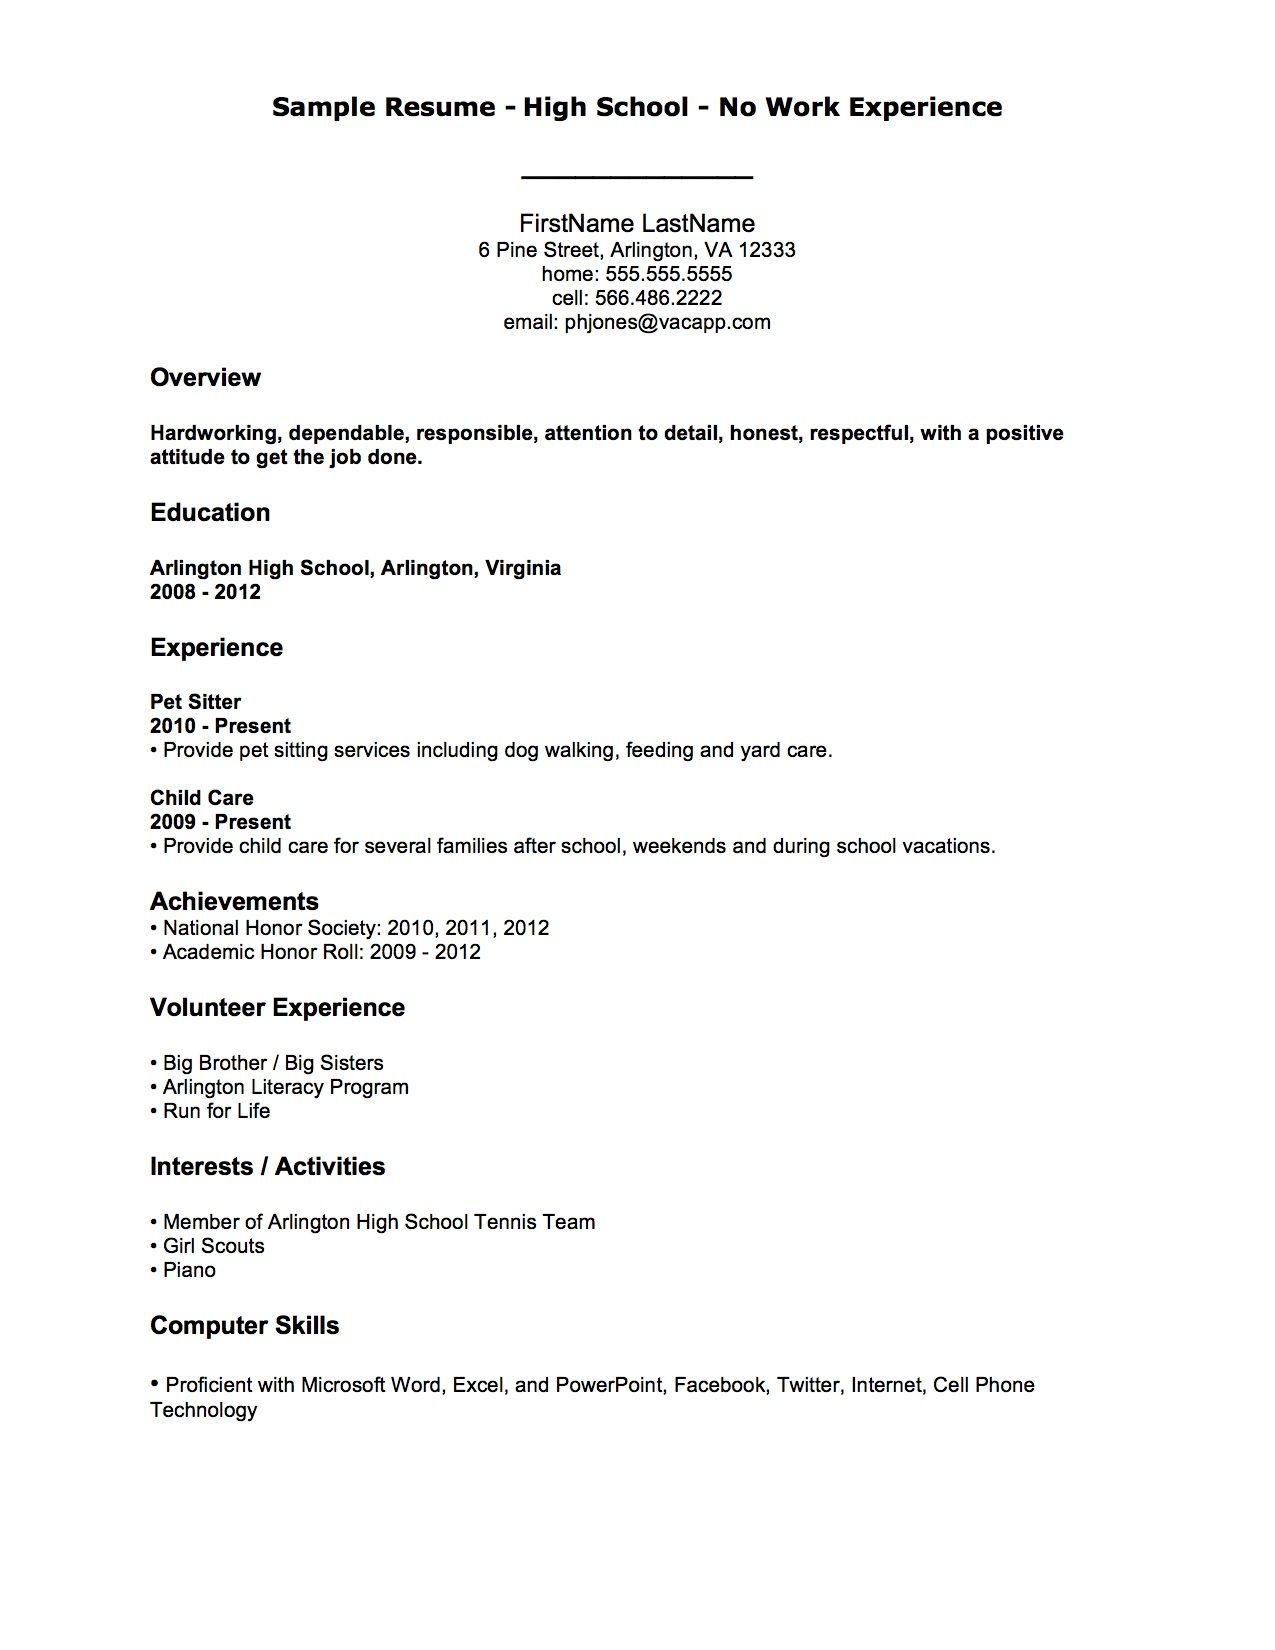 Sample Resume With No Work Experience